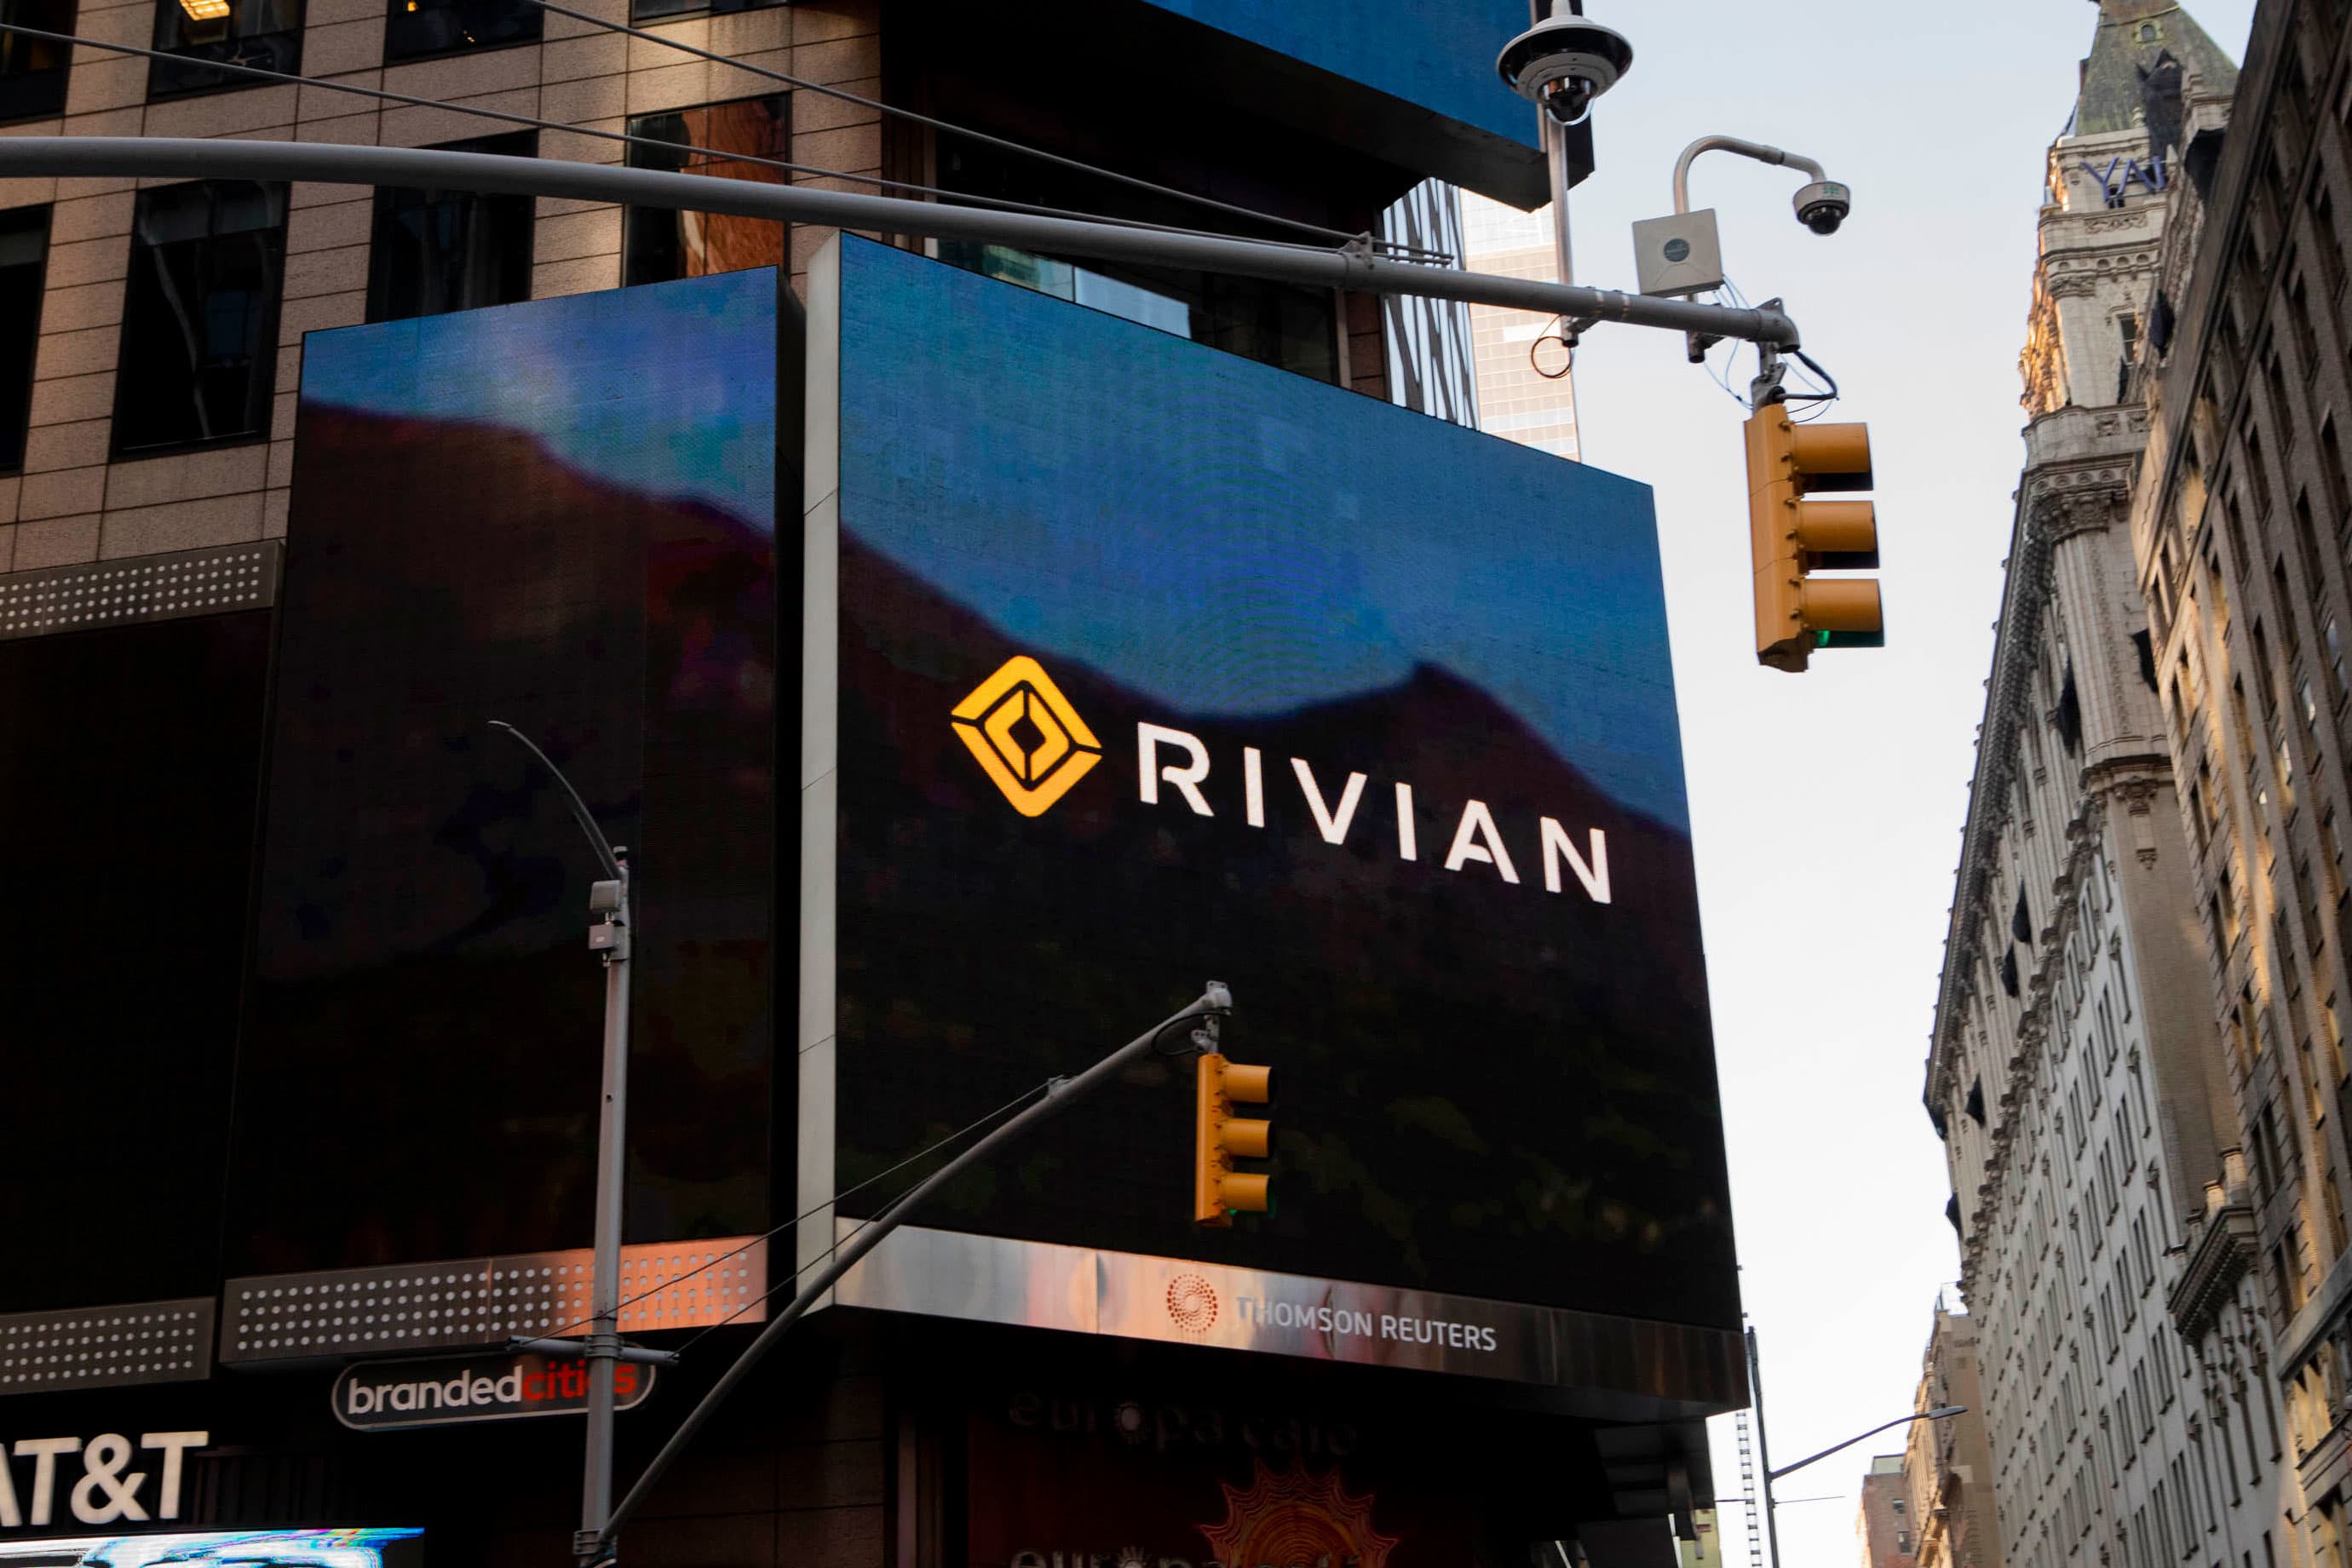 Rivian expects to deliver a modest 25,000 vehicles this year at it ramps EV production